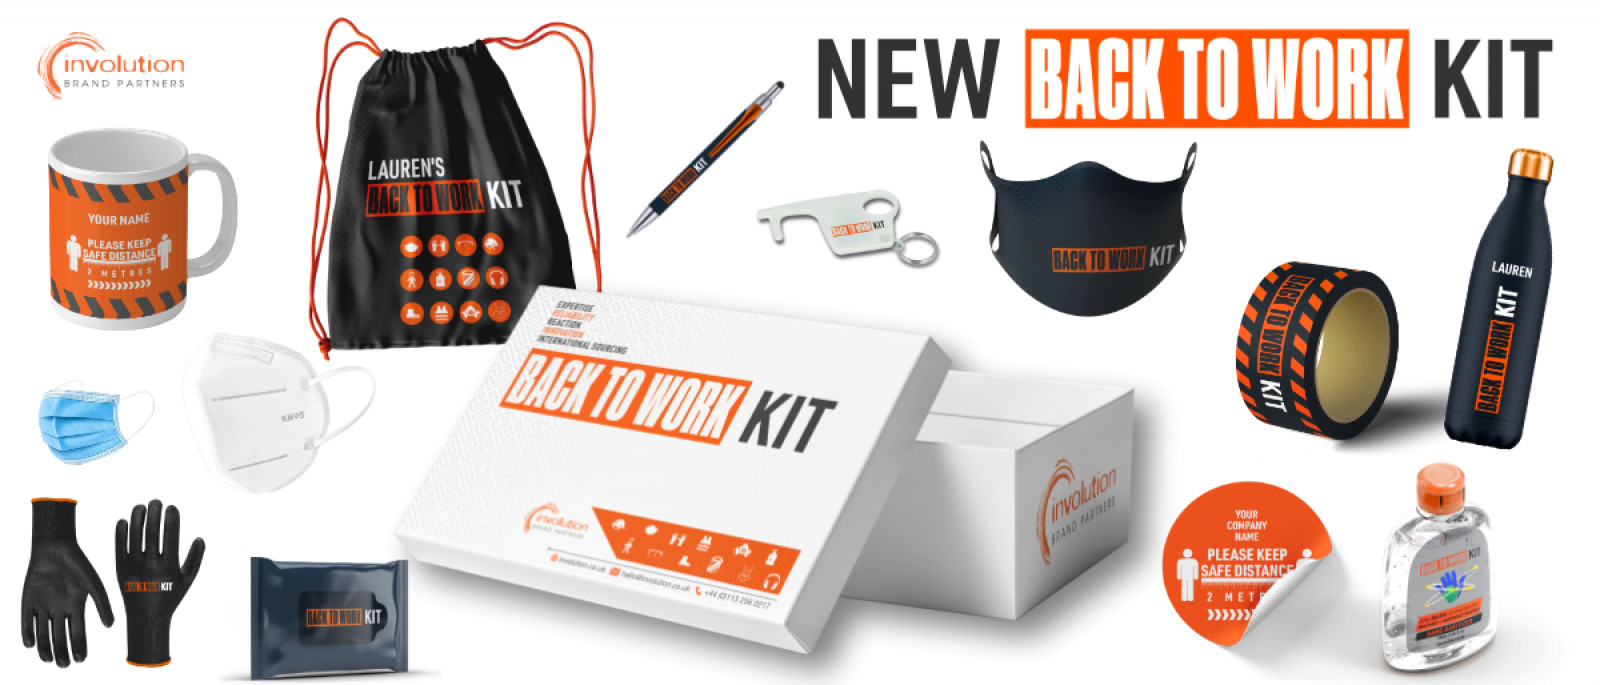 New ‘Back to Work’ kits launched by Involution to...